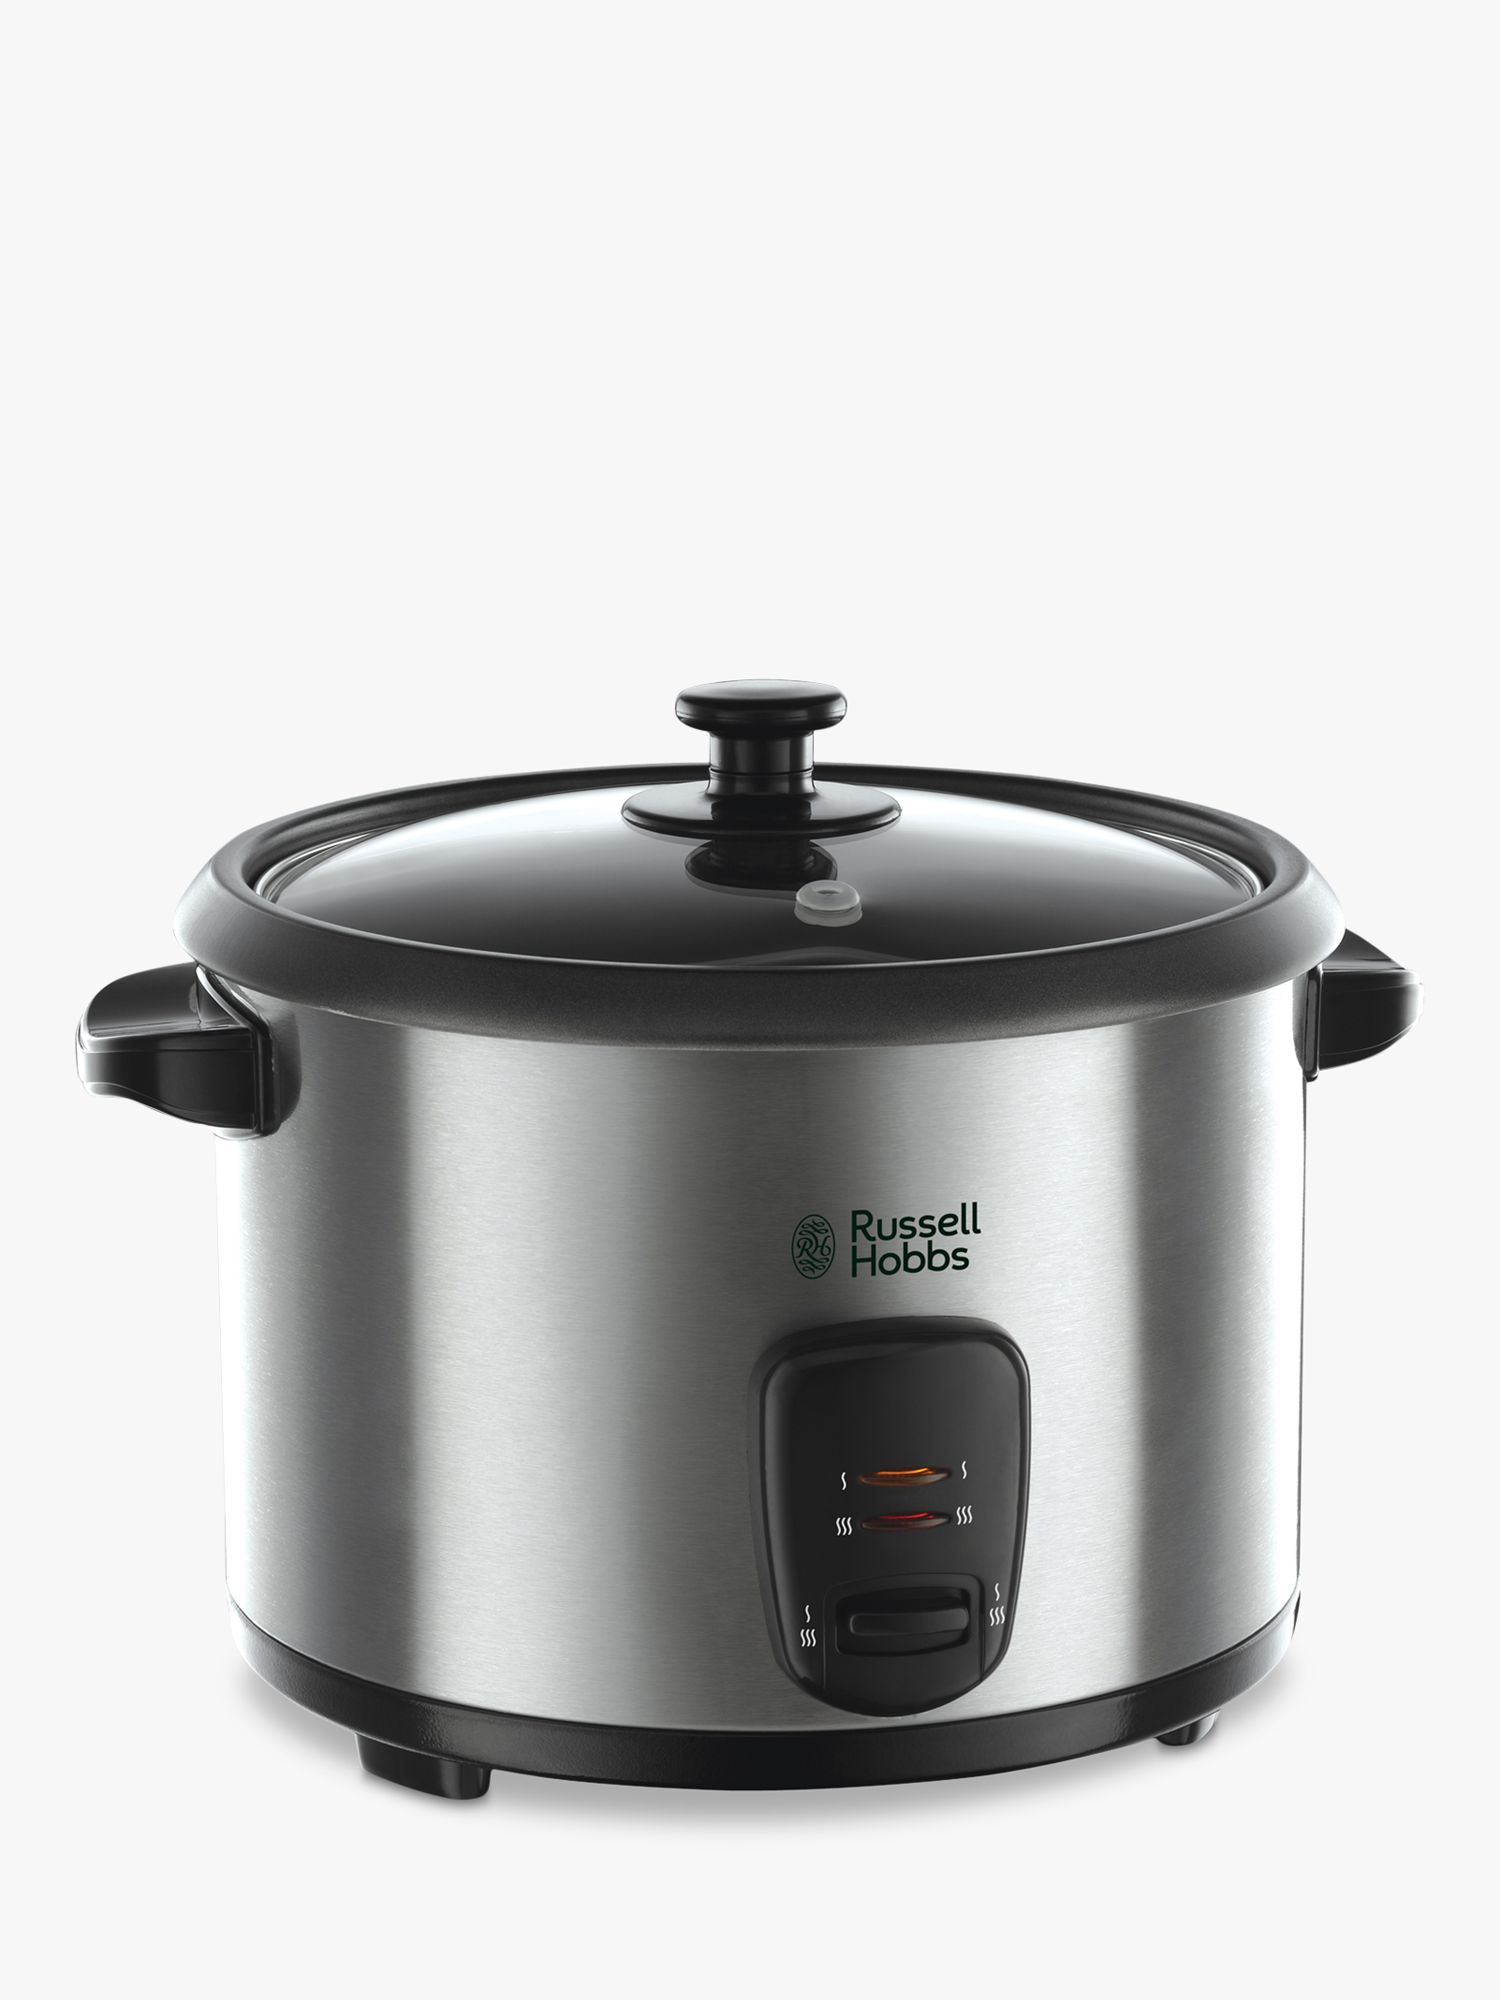 Russell Hobbs 19750 Cook at Home Rice Cooker and Steamer